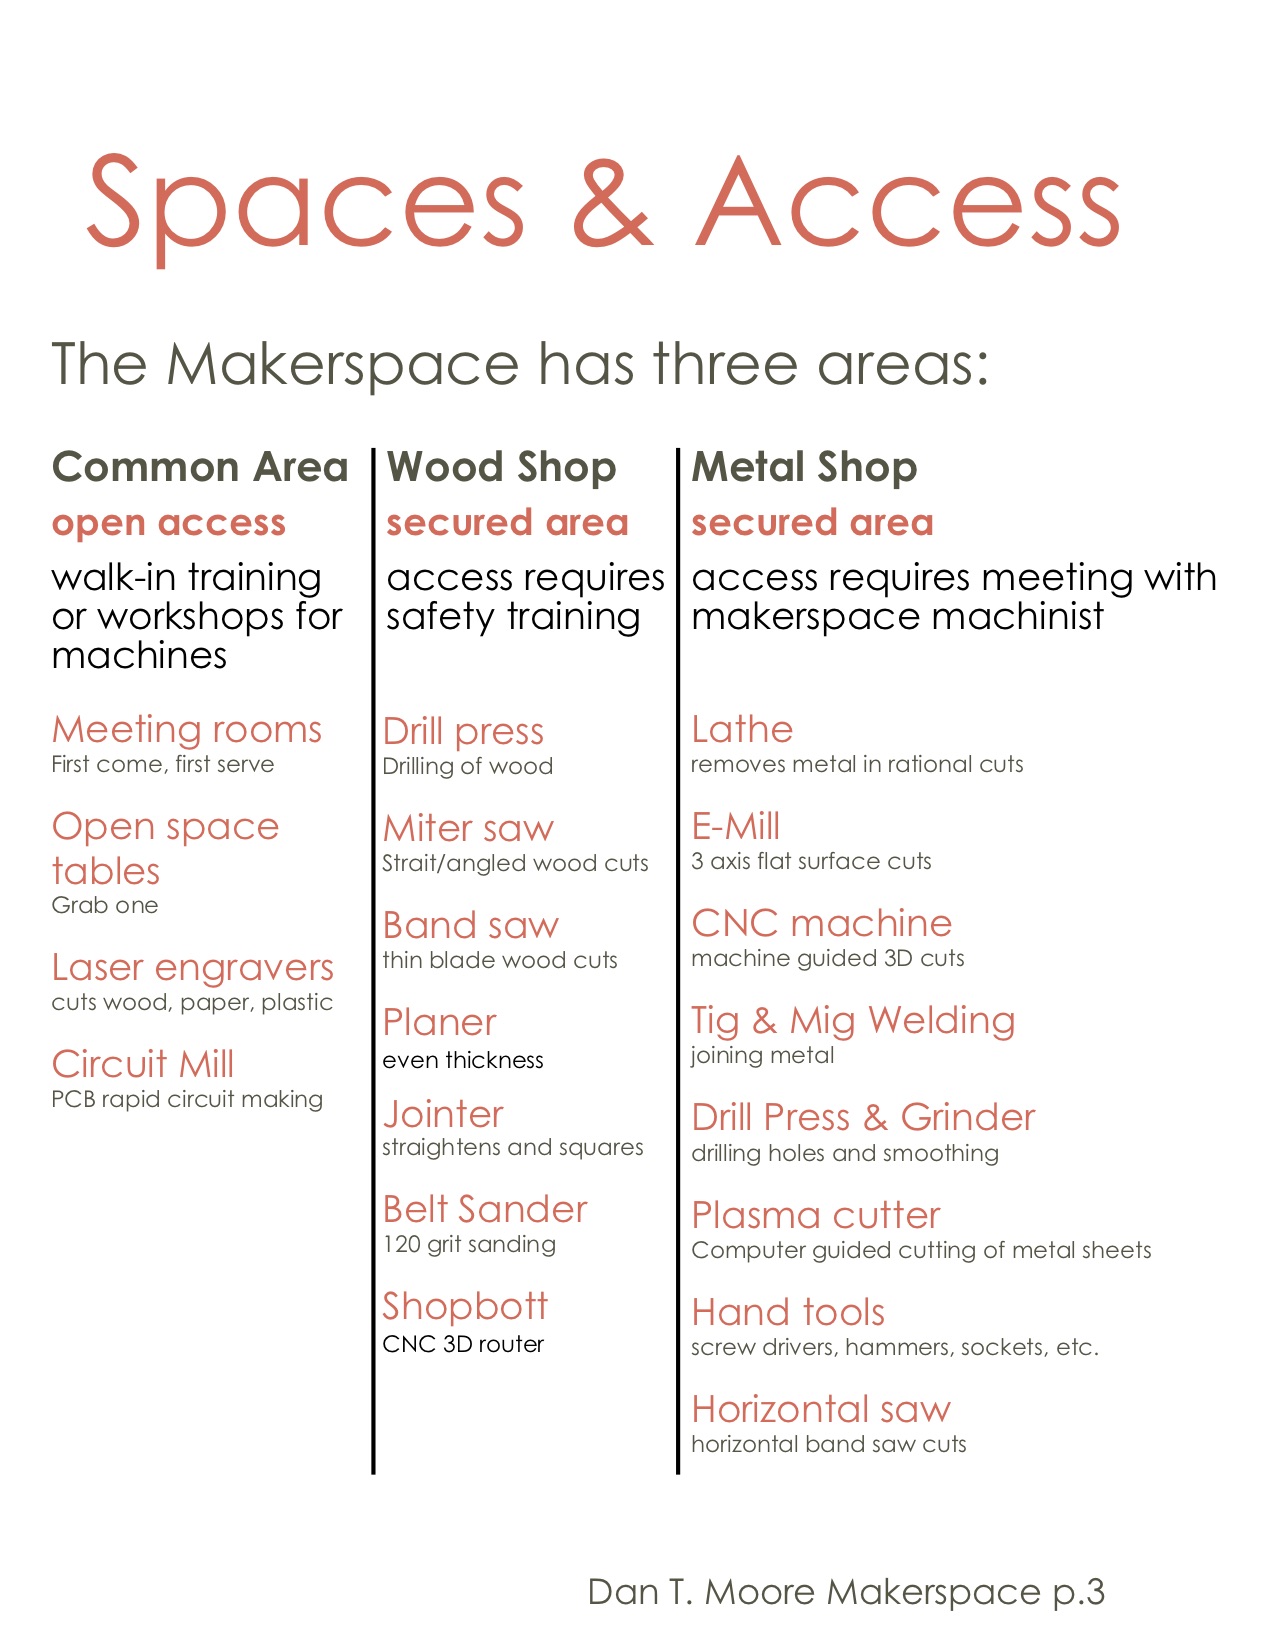 Makerspace Spaces